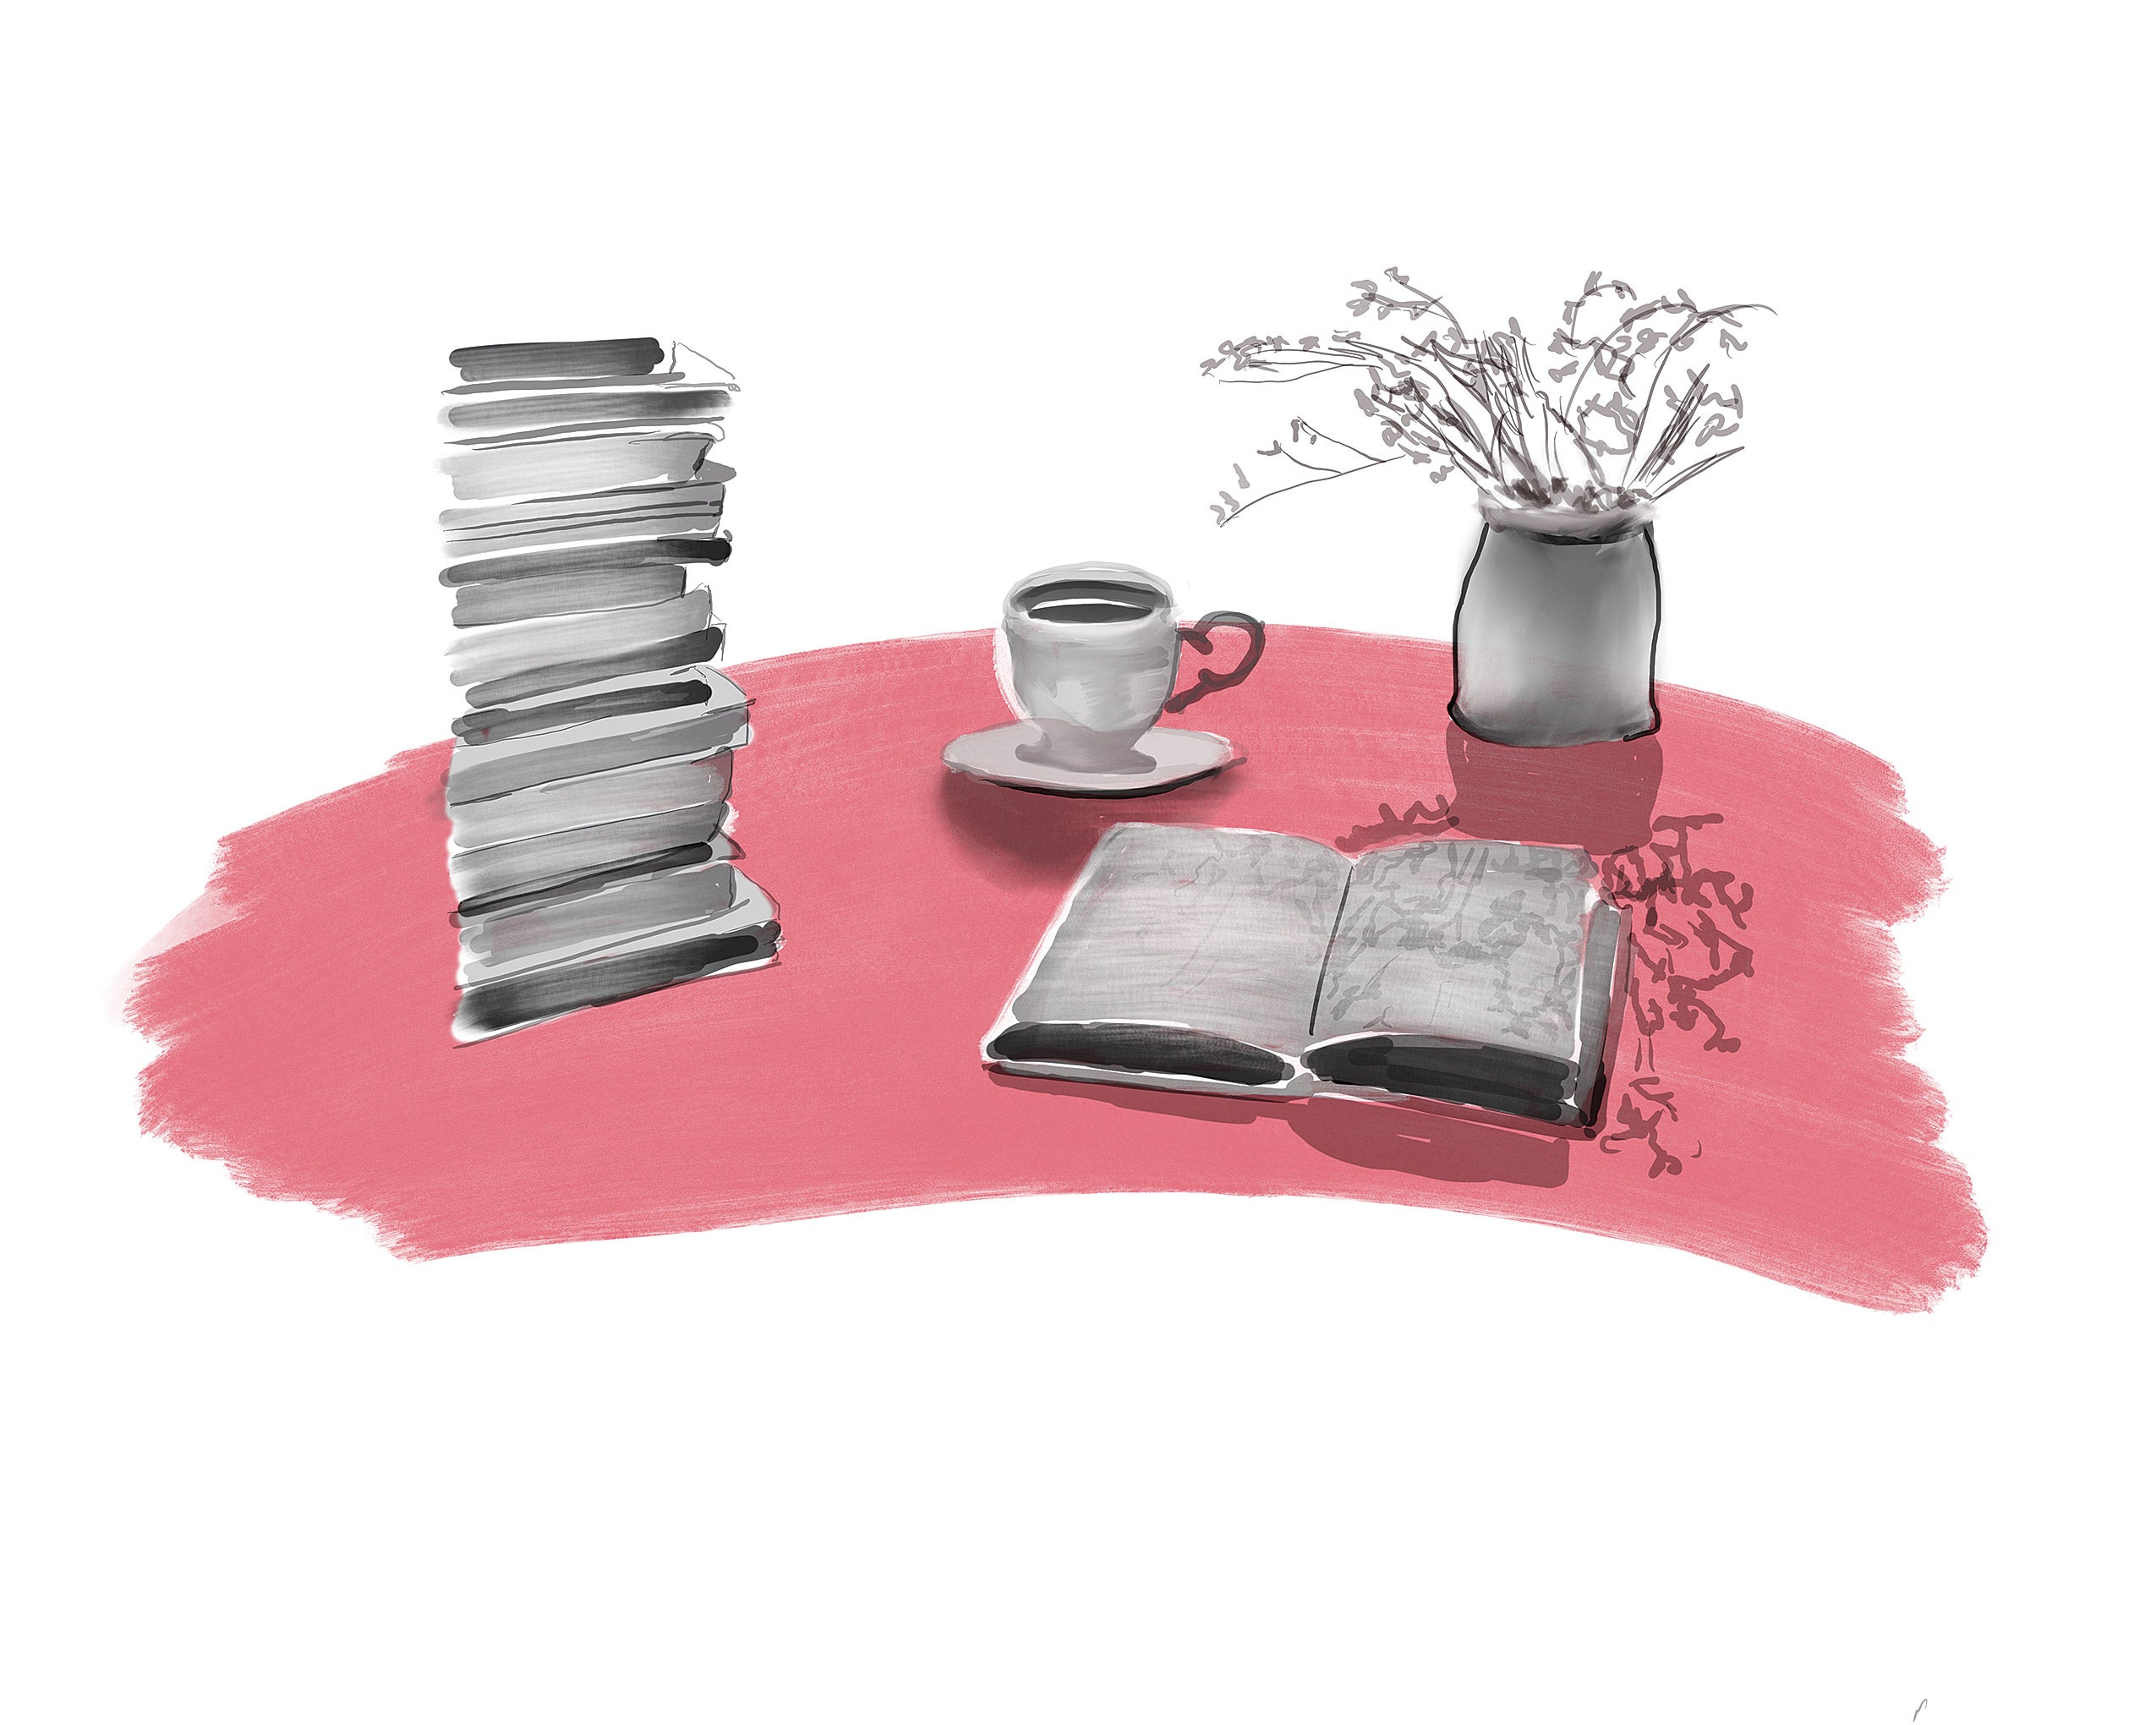 Illustration of books, a coffee cup and vase of flowers